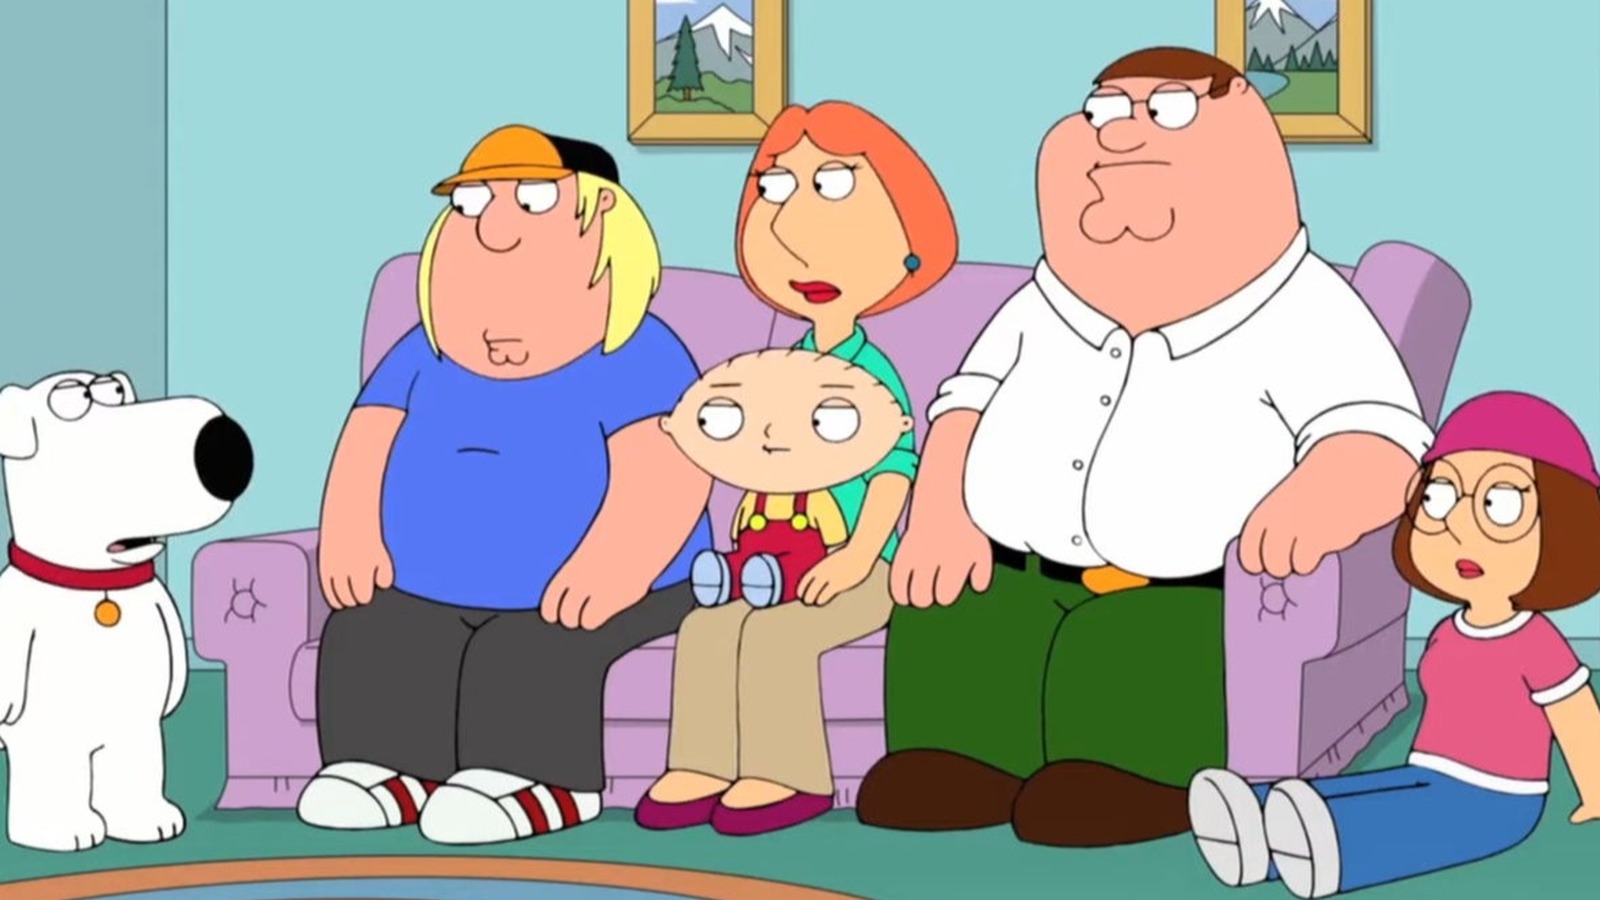 What episode is dis from : r/familyguy